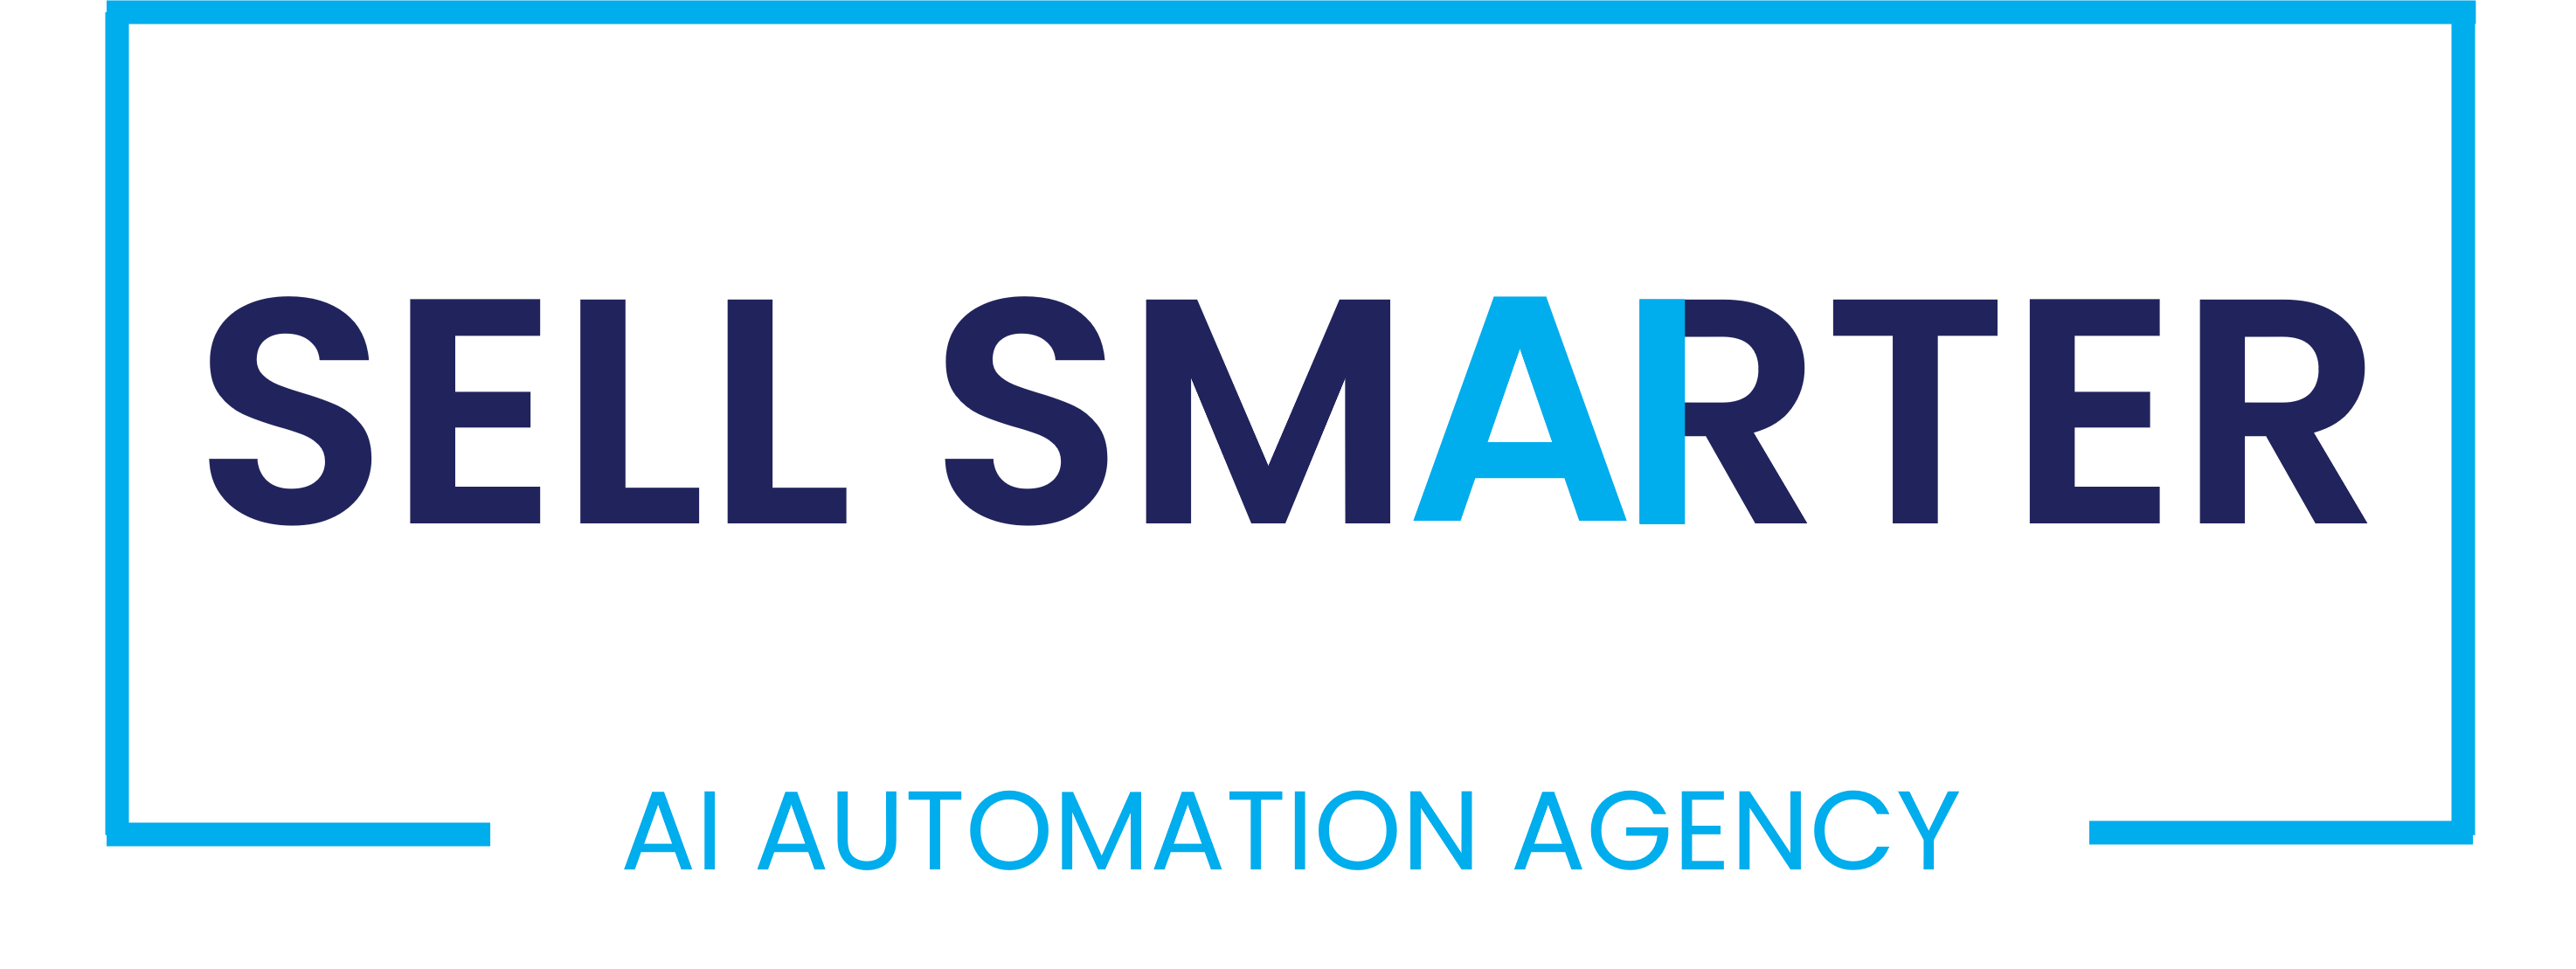 Sell Smarter - AI Automation Agency - Navy Teal